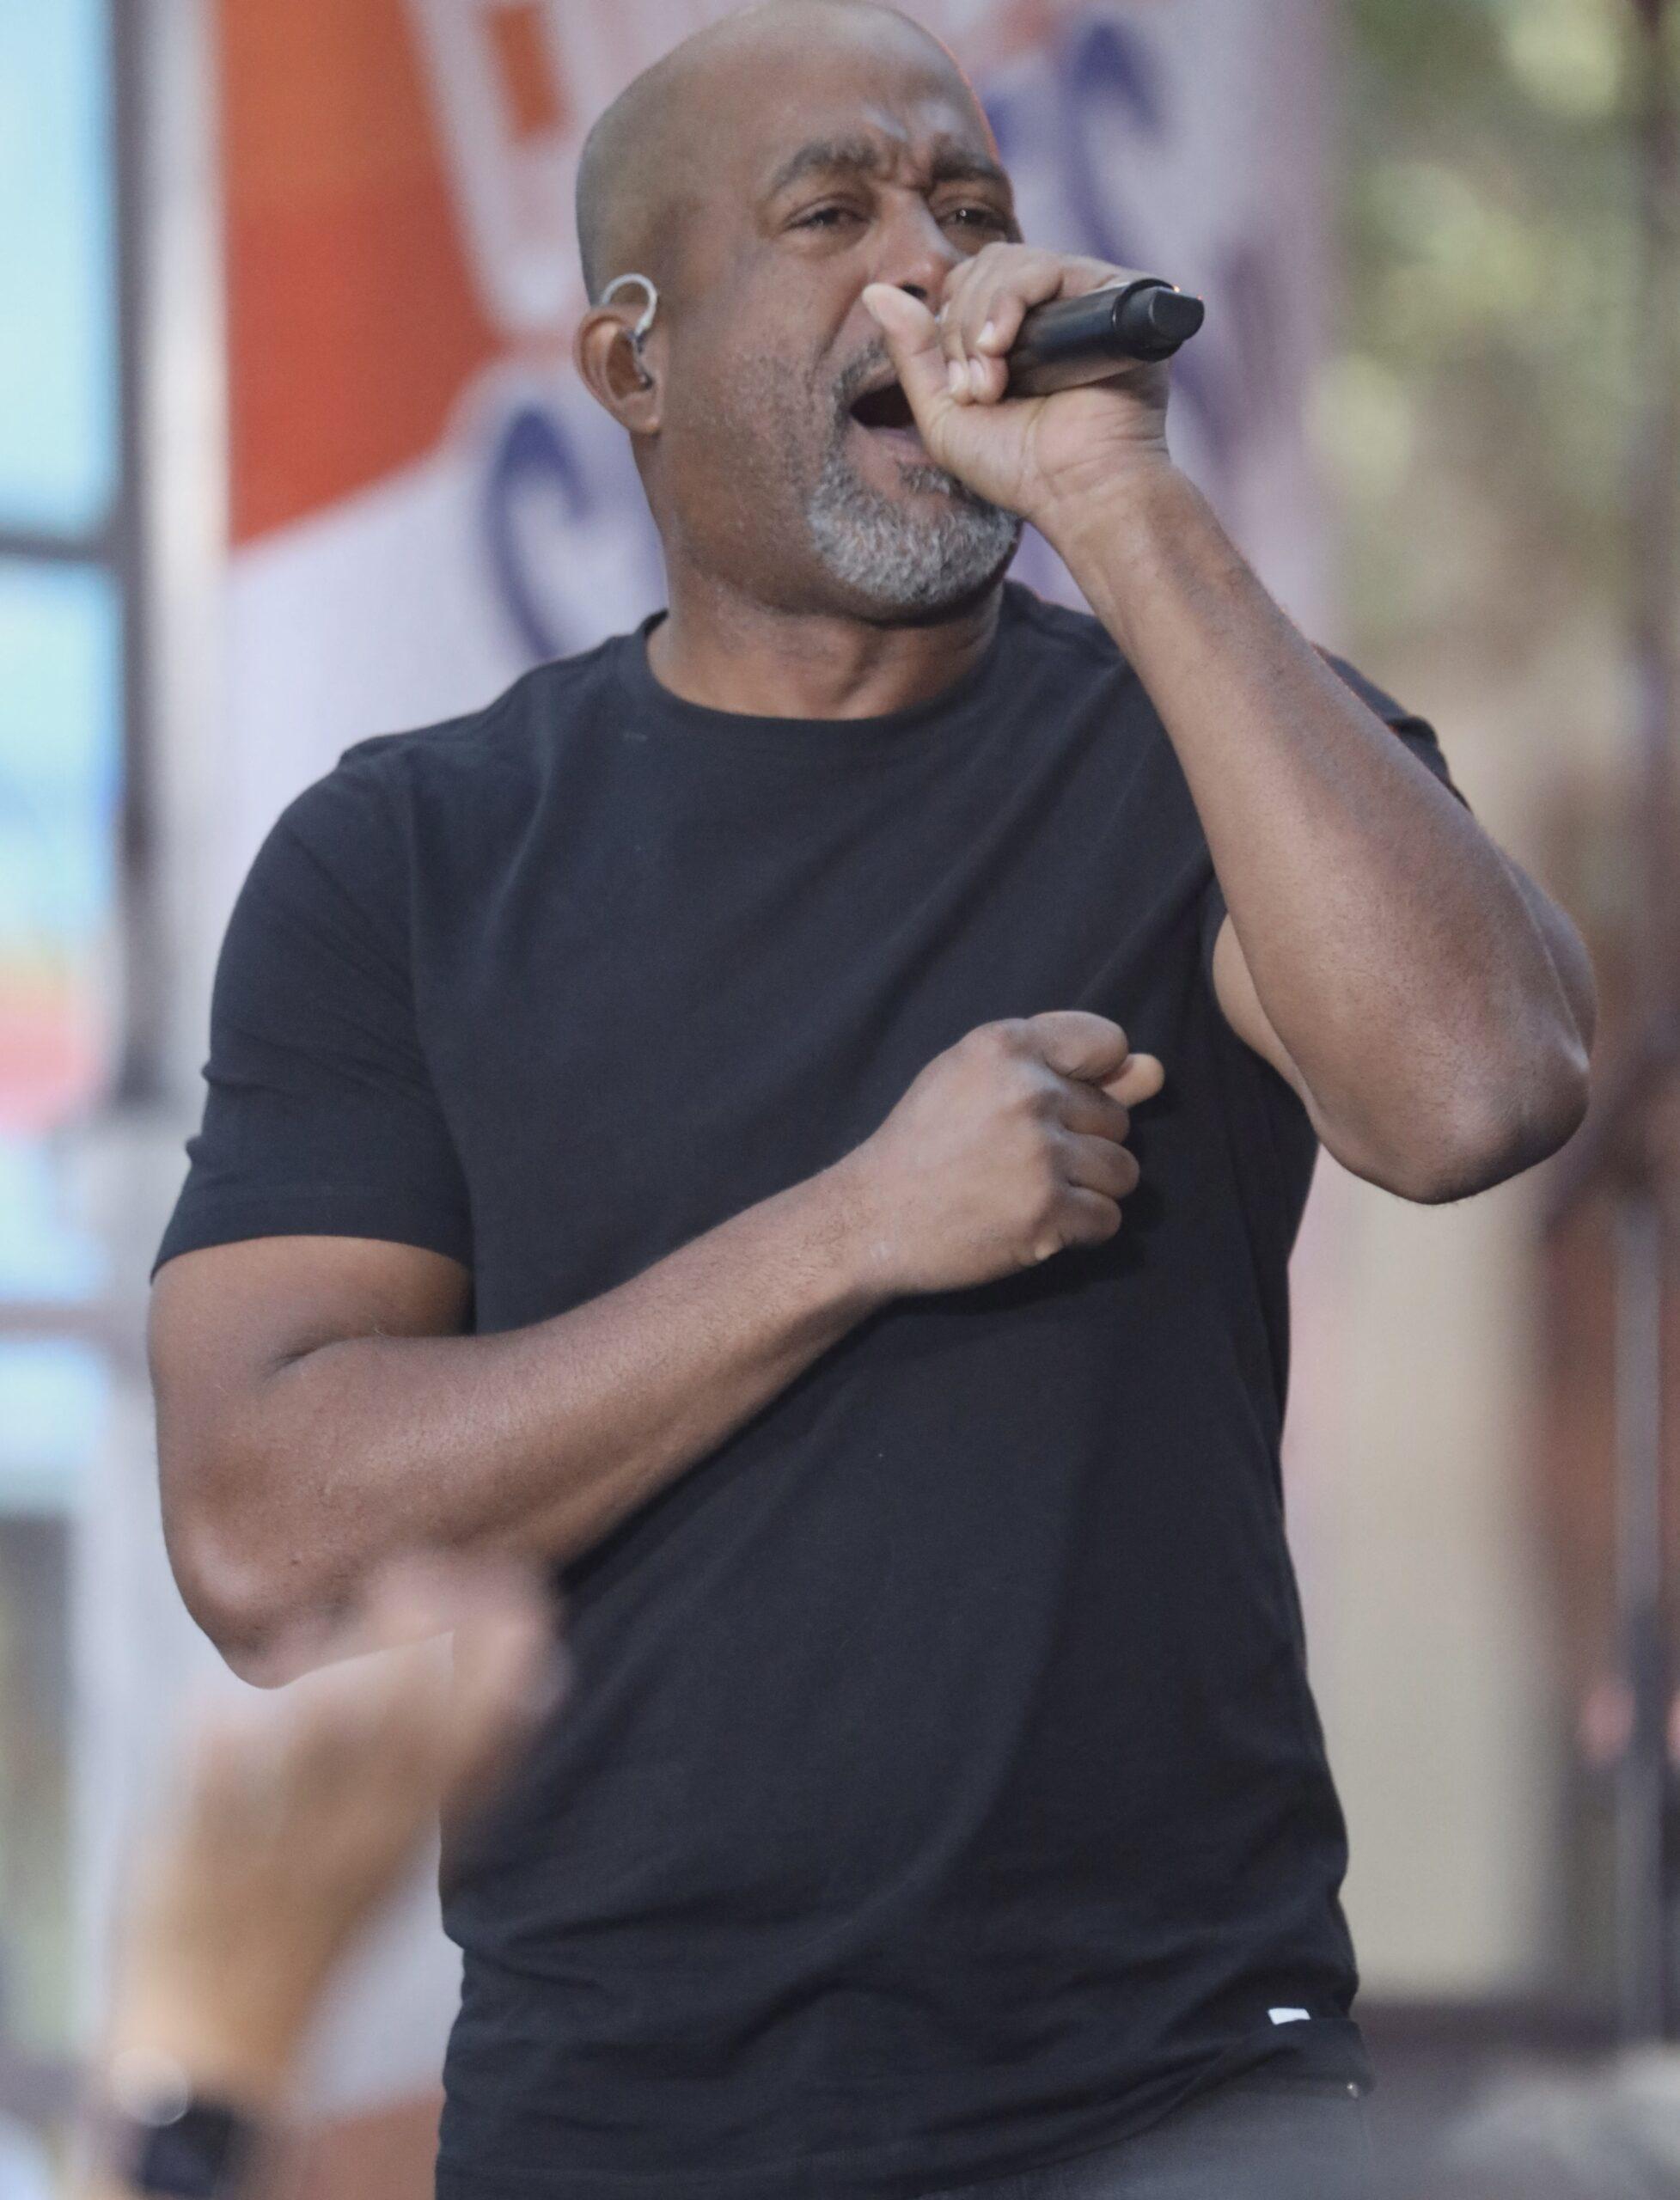 "Hootie & The Blowfish' Singer Darius Rucker Arrested for Drug Offense In Tennessee